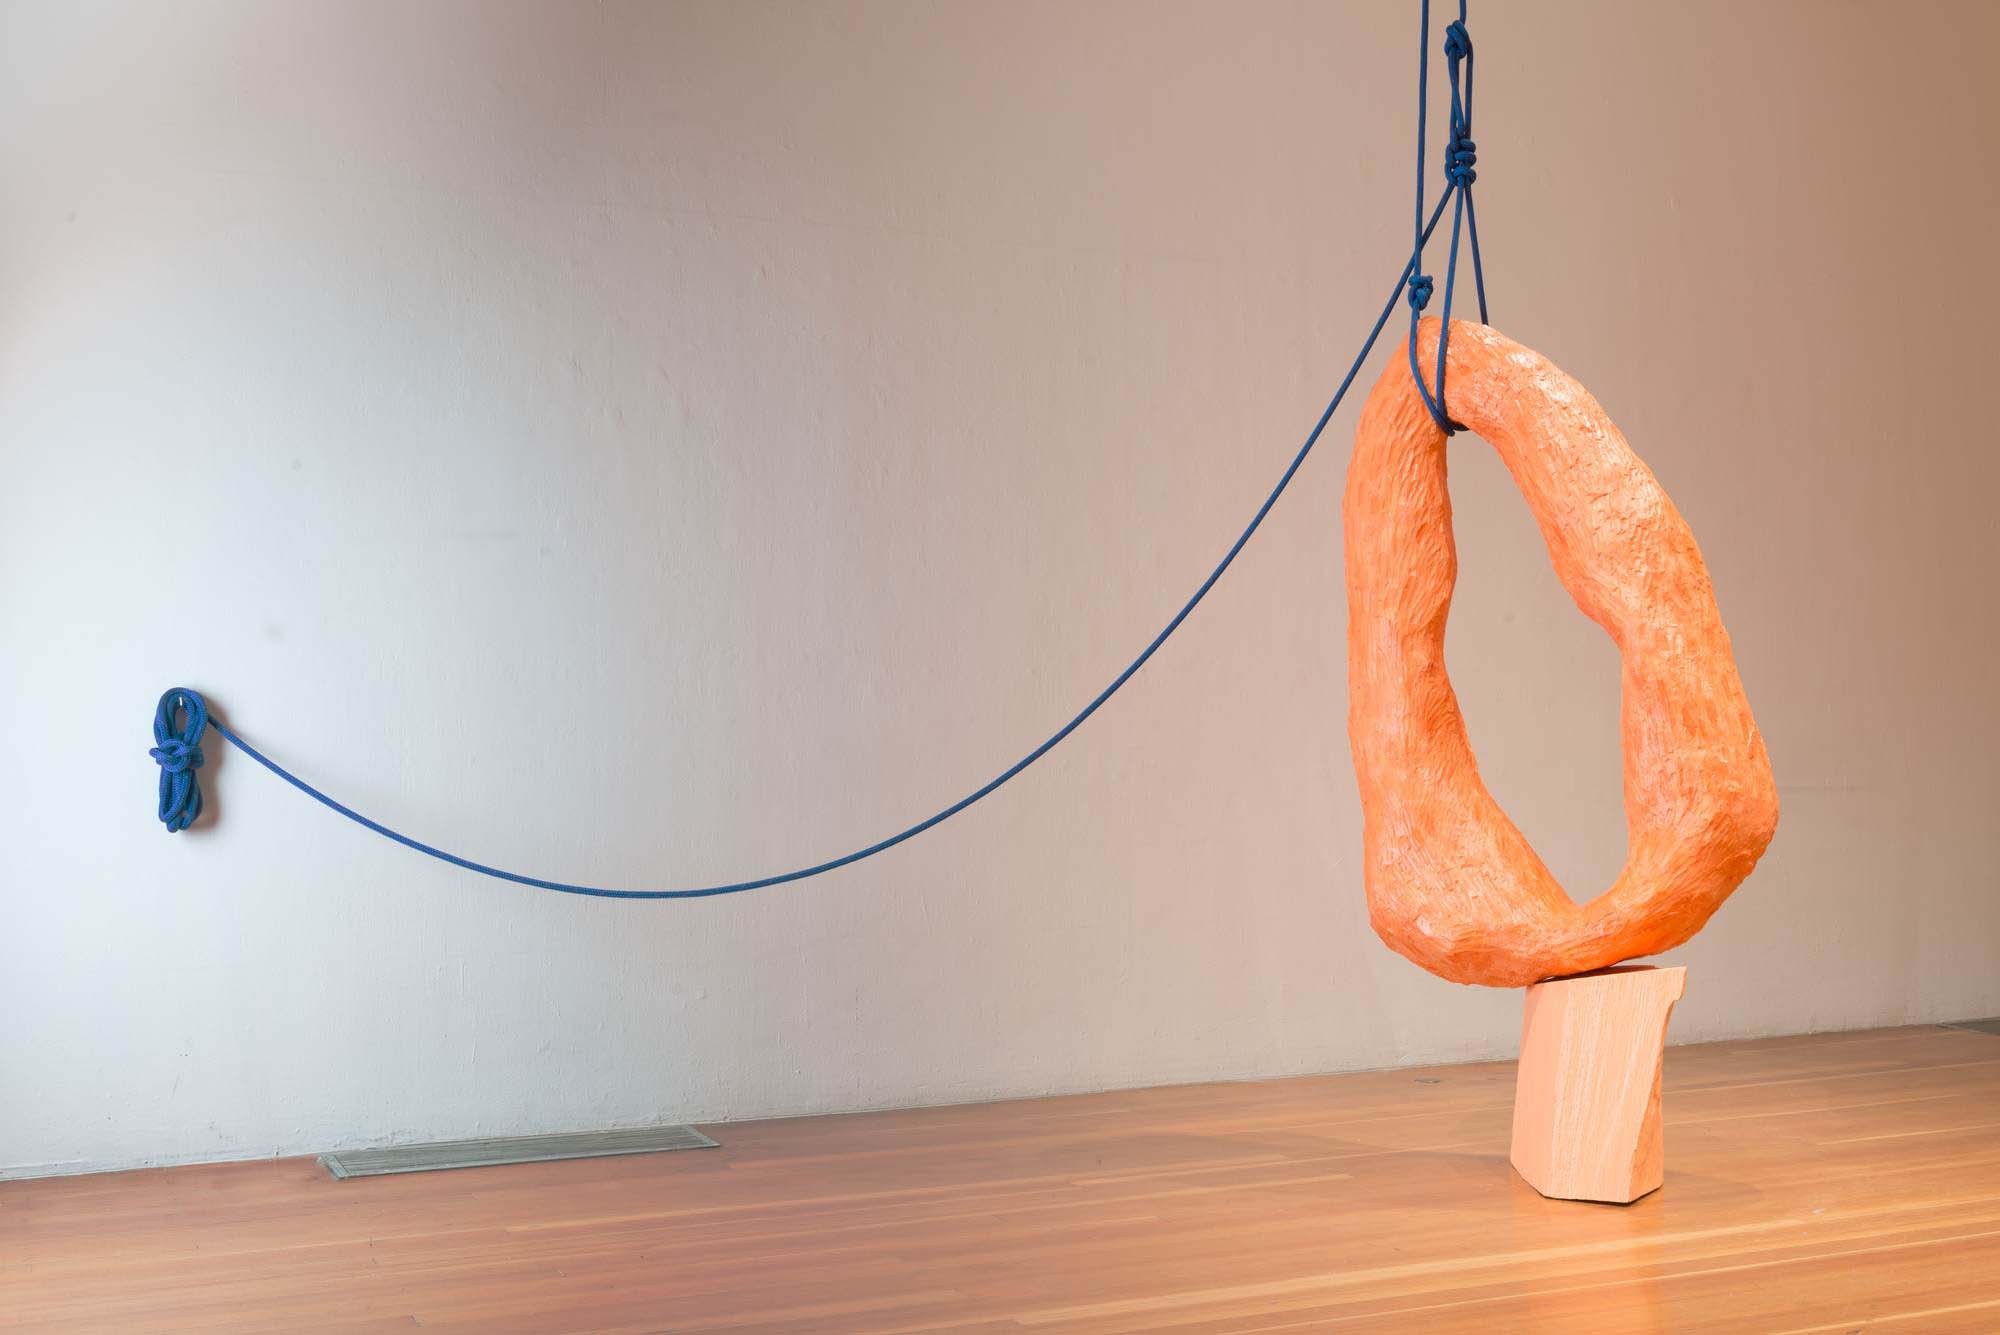 Kim Garcia, Boulders resting on a blade, Forton, acrylic latex paint, rope and wood. 2018